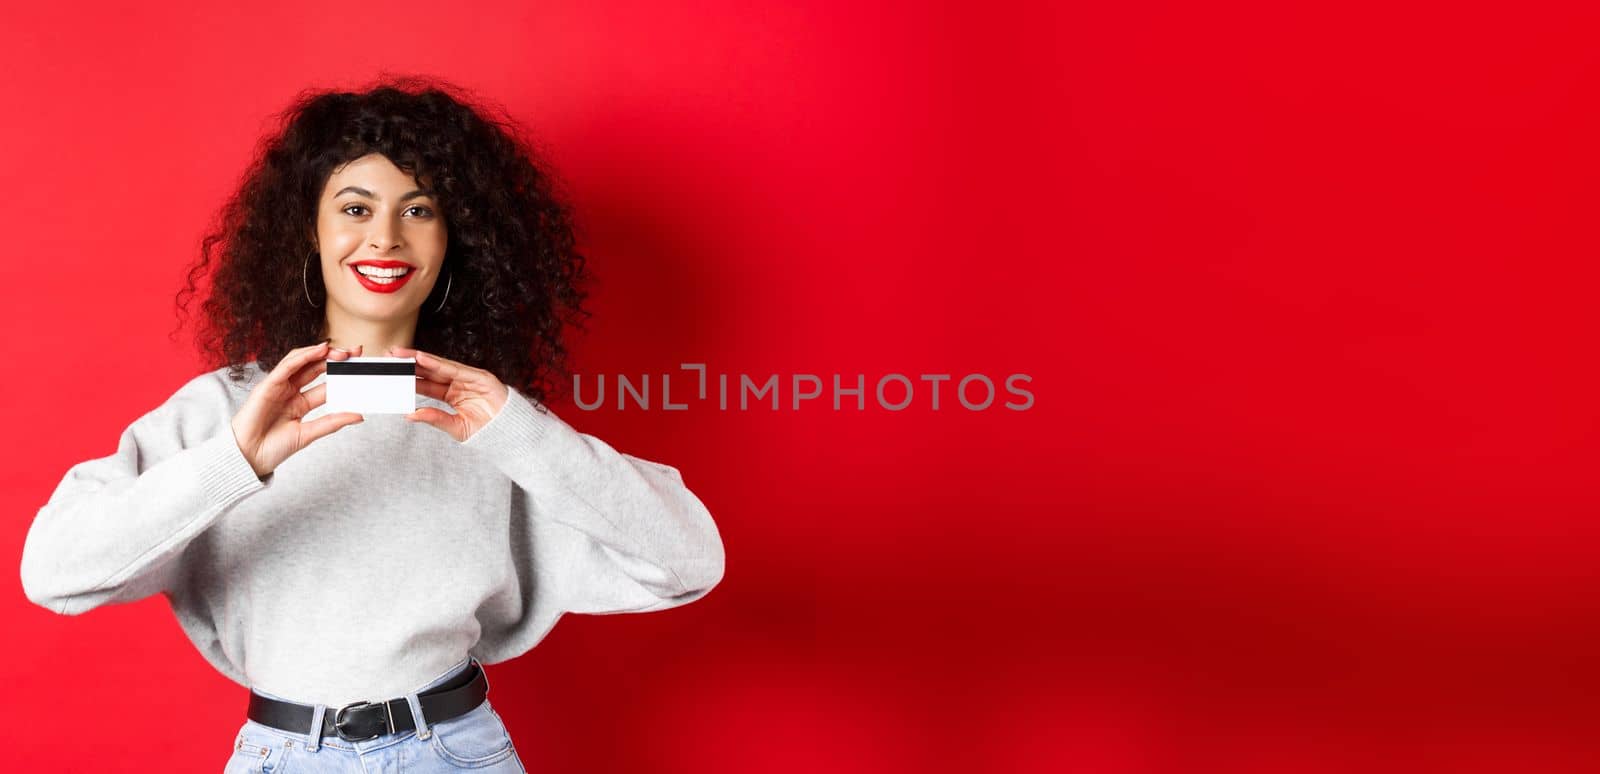 Happy lady with curly hair showing plastic credit card and smiling, standing against red background. Shopping concept.